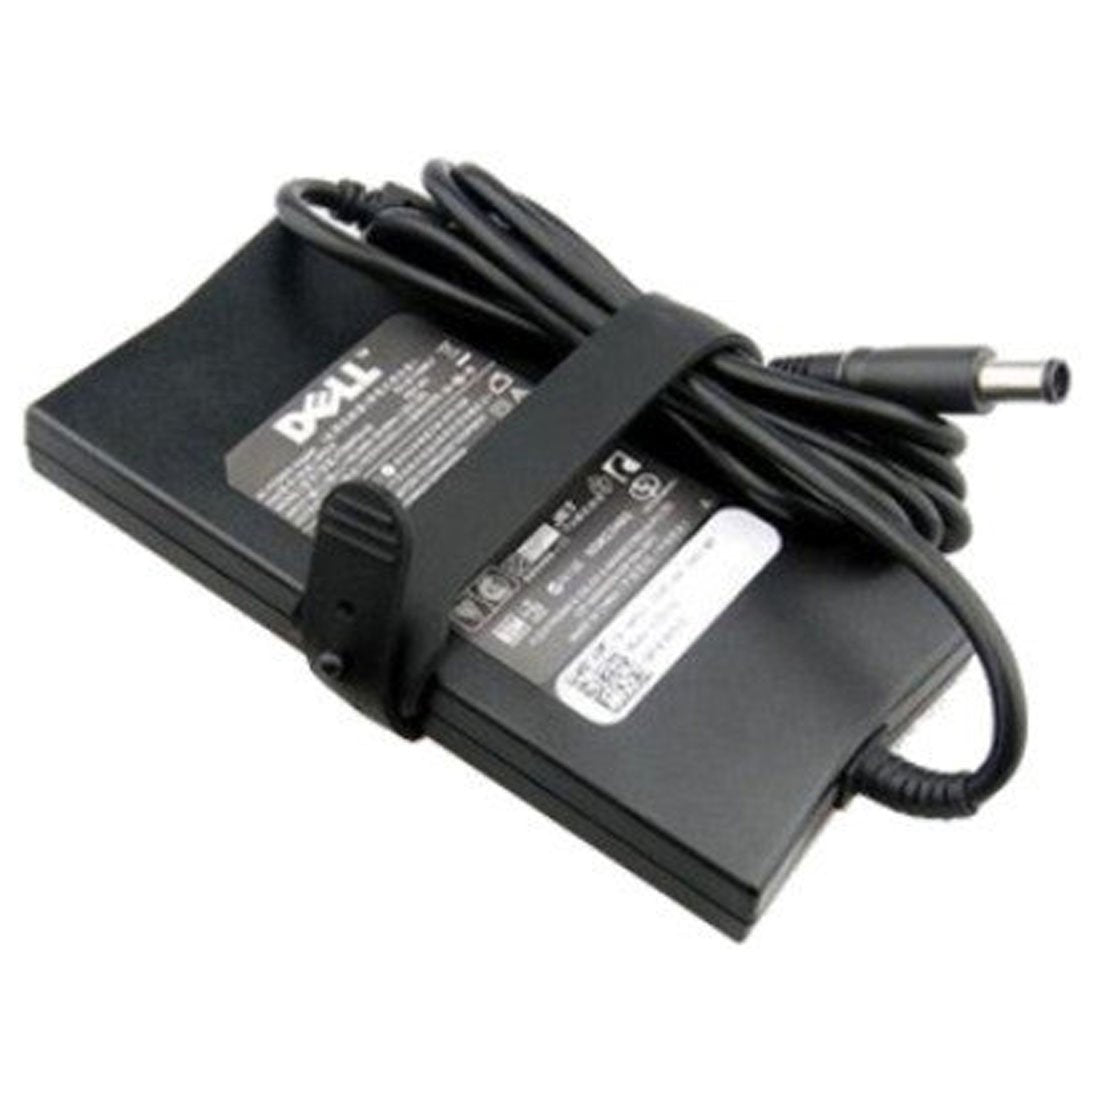 Dell Original 130W 19.5V 7.4mm Pin Laptop Charger Adapter for Inspiron 17R 7720 With Power Cord